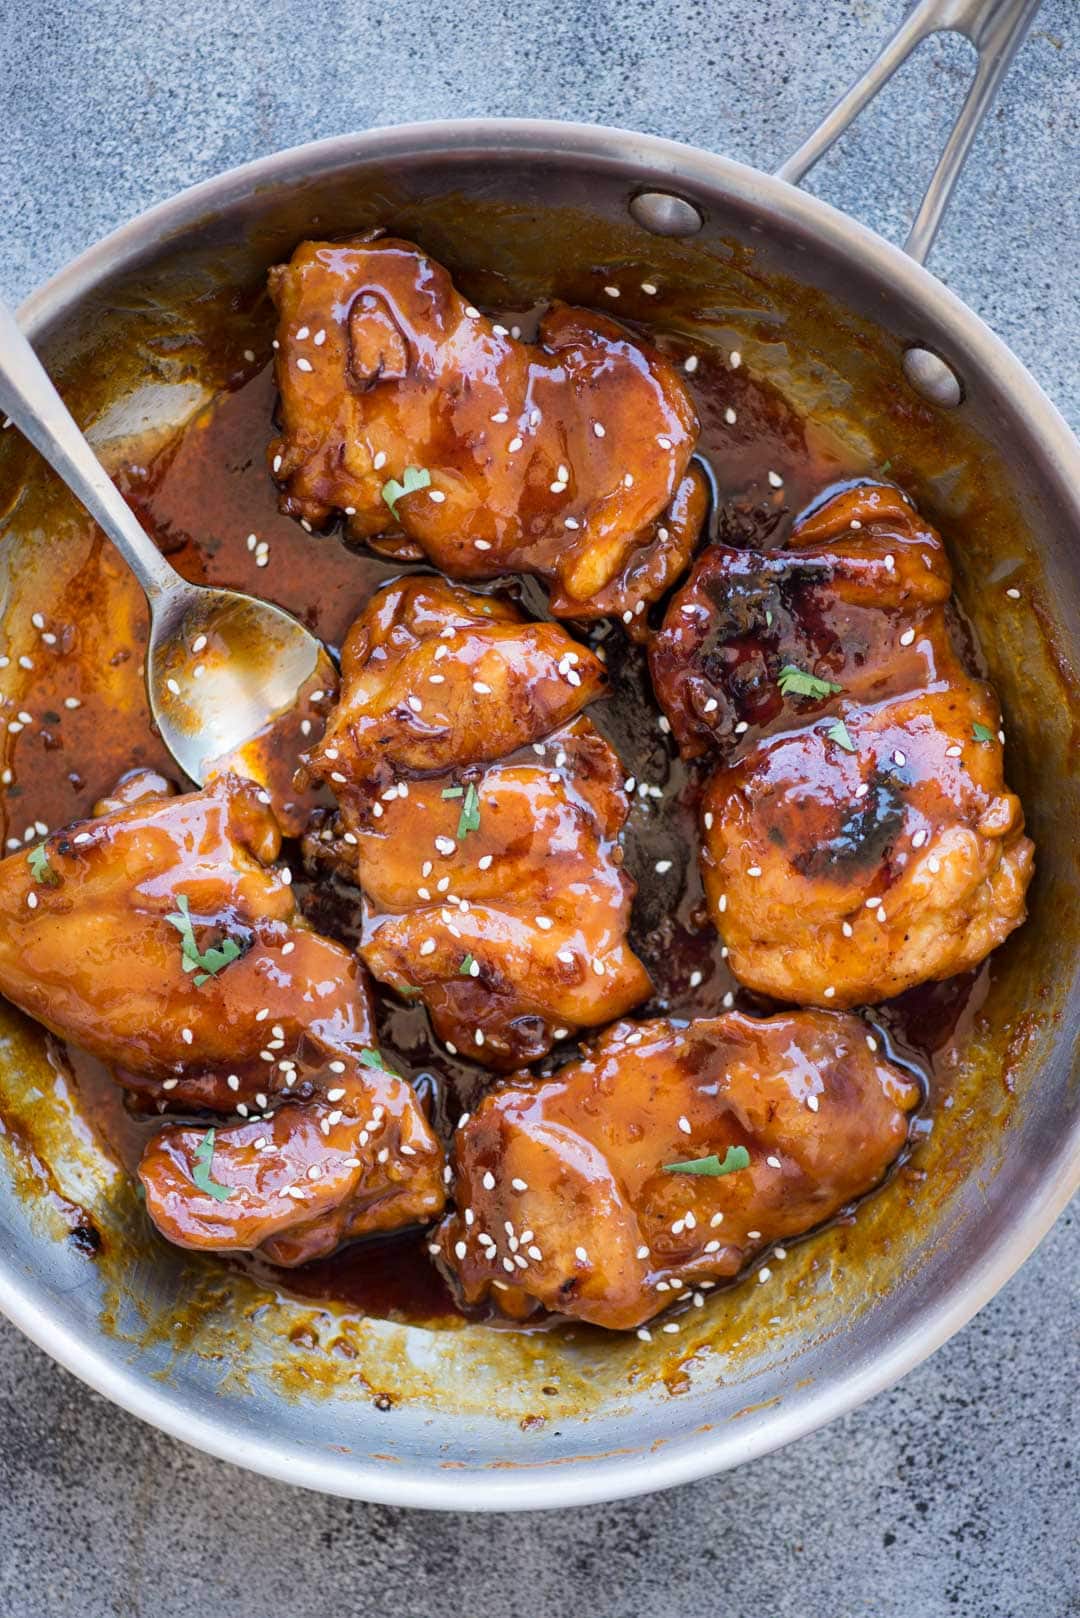 Honey Sriracha Chicken has Juicy chicken thighs in an incredibly delicious sticky, sweet and spicy Honey Sriracha sauce. You need less than 20 minutes to make this recipe with basic pantry ingredients.  